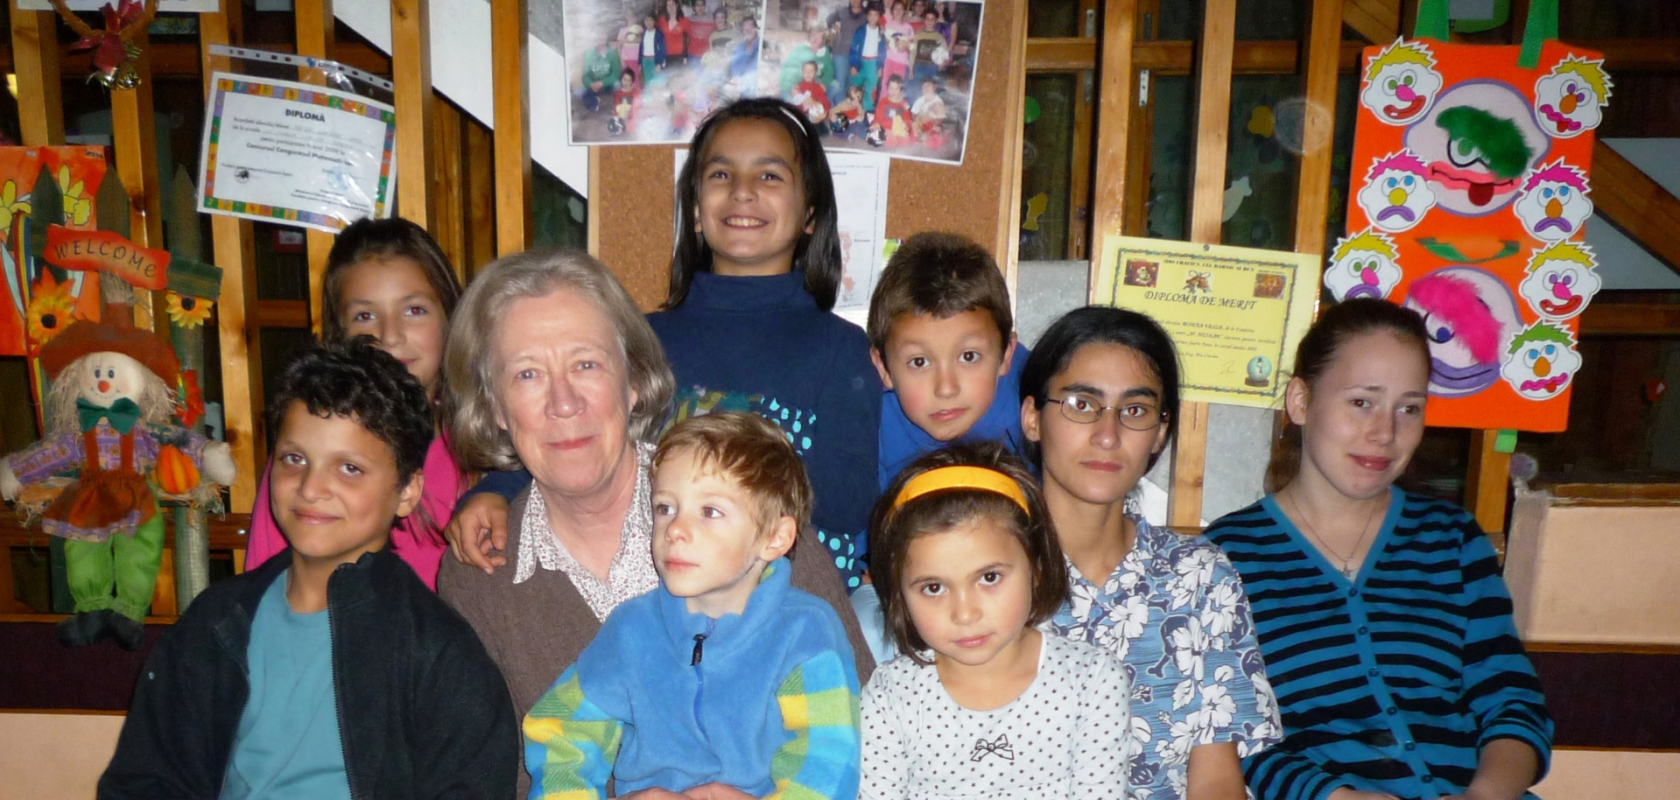 FARA Charity FOunder Jane Nicholson sits surrounded by Romanian children